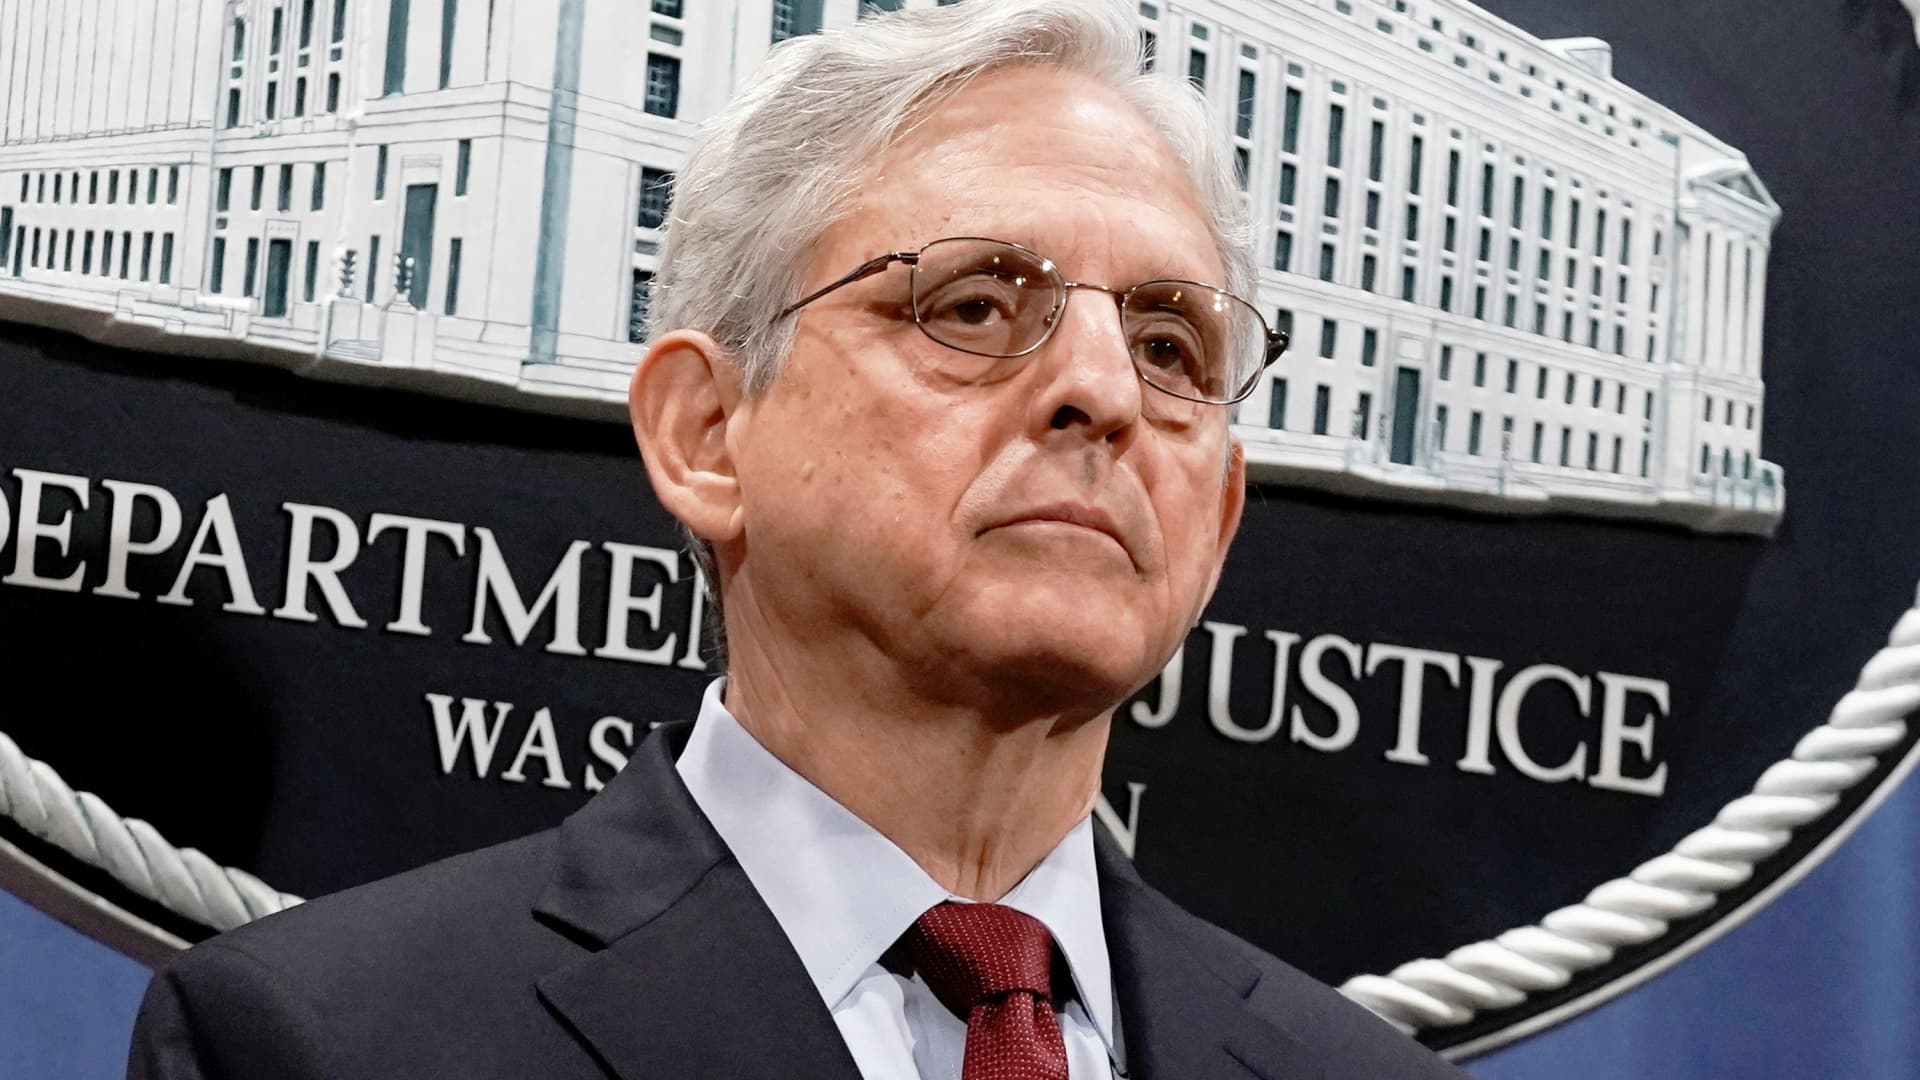 U.S. Attorney General Merrick Garland attends a news conference to announce that the Justice Department will file a lawsuit challenging a Georgia election law that imposes new limits on voting, at the Department of Justice in Washington, D.C., June 25, 2021.